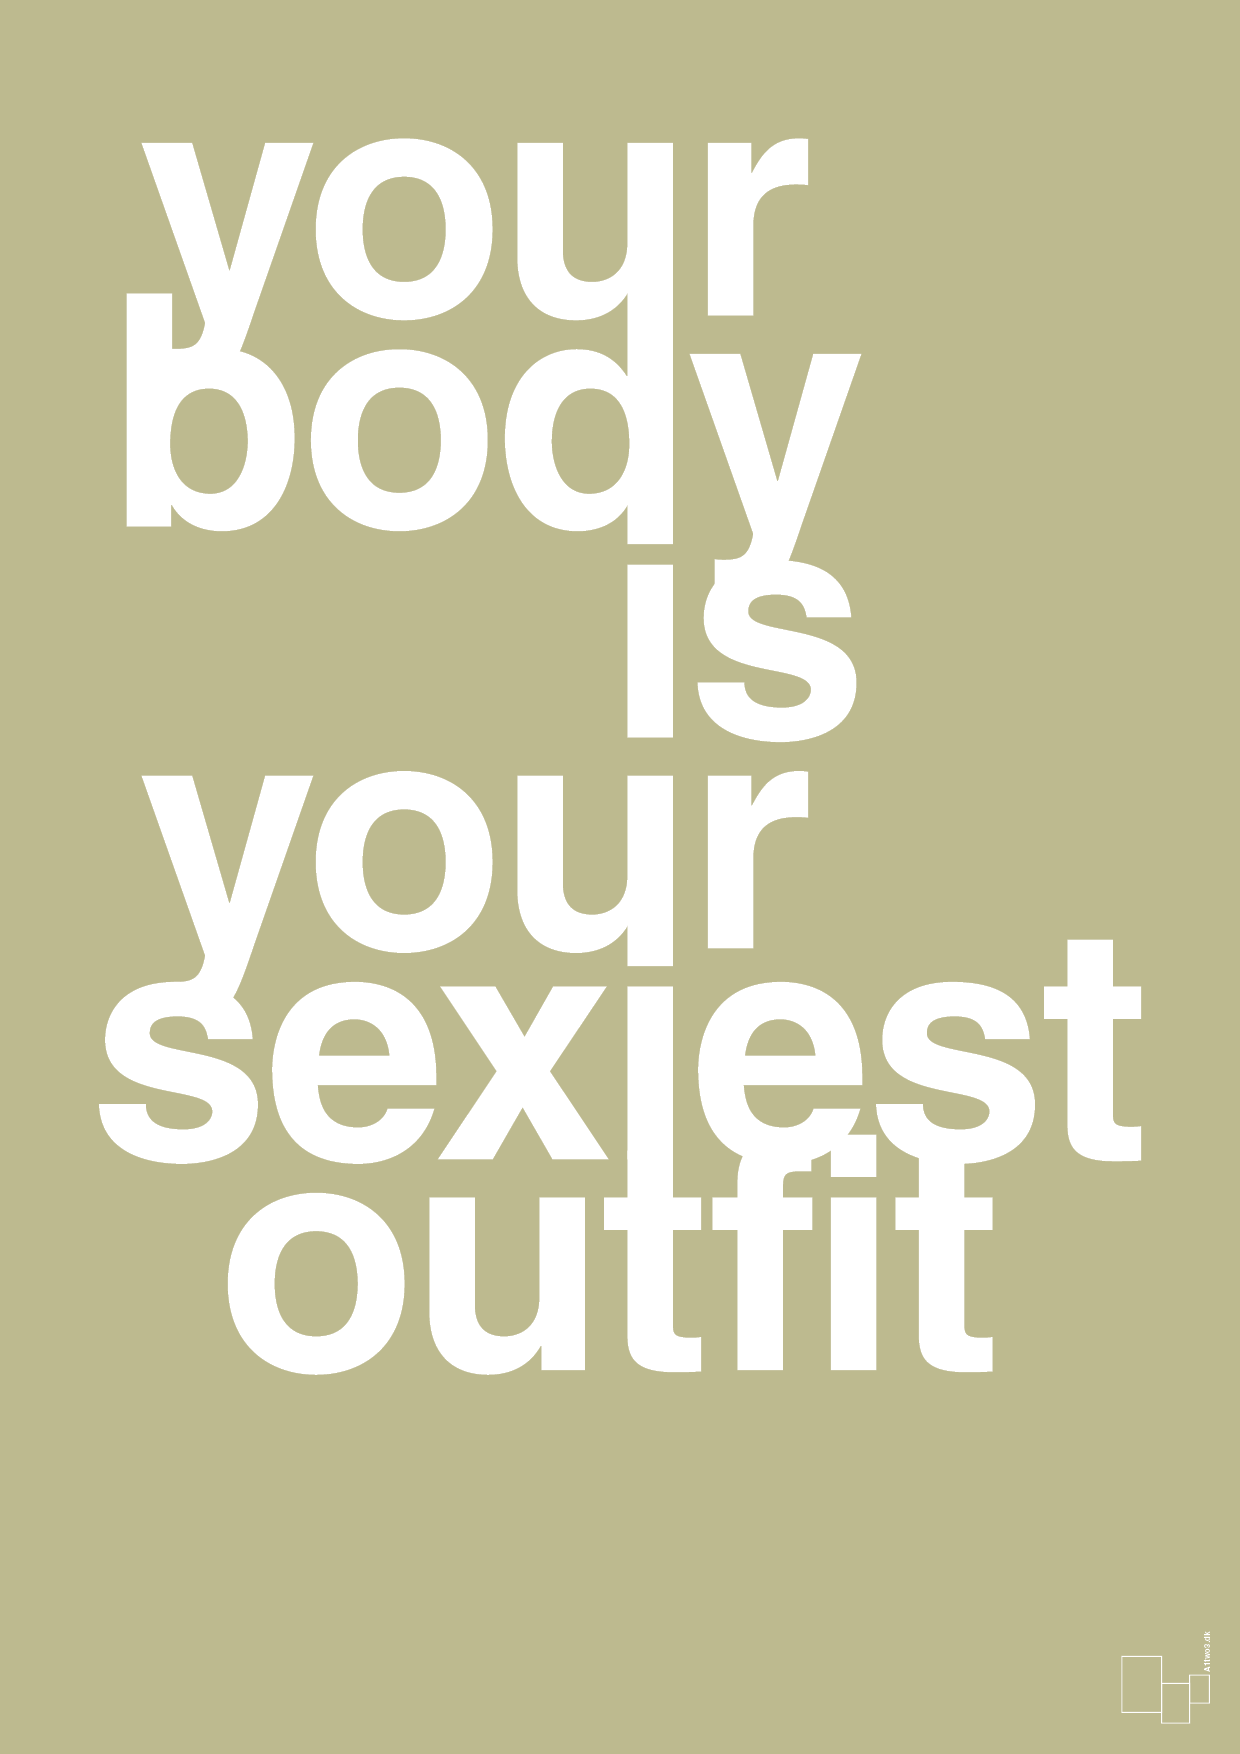 your body is your sexiest outfit - Plakat med Sport & Fritid i Back to Nature